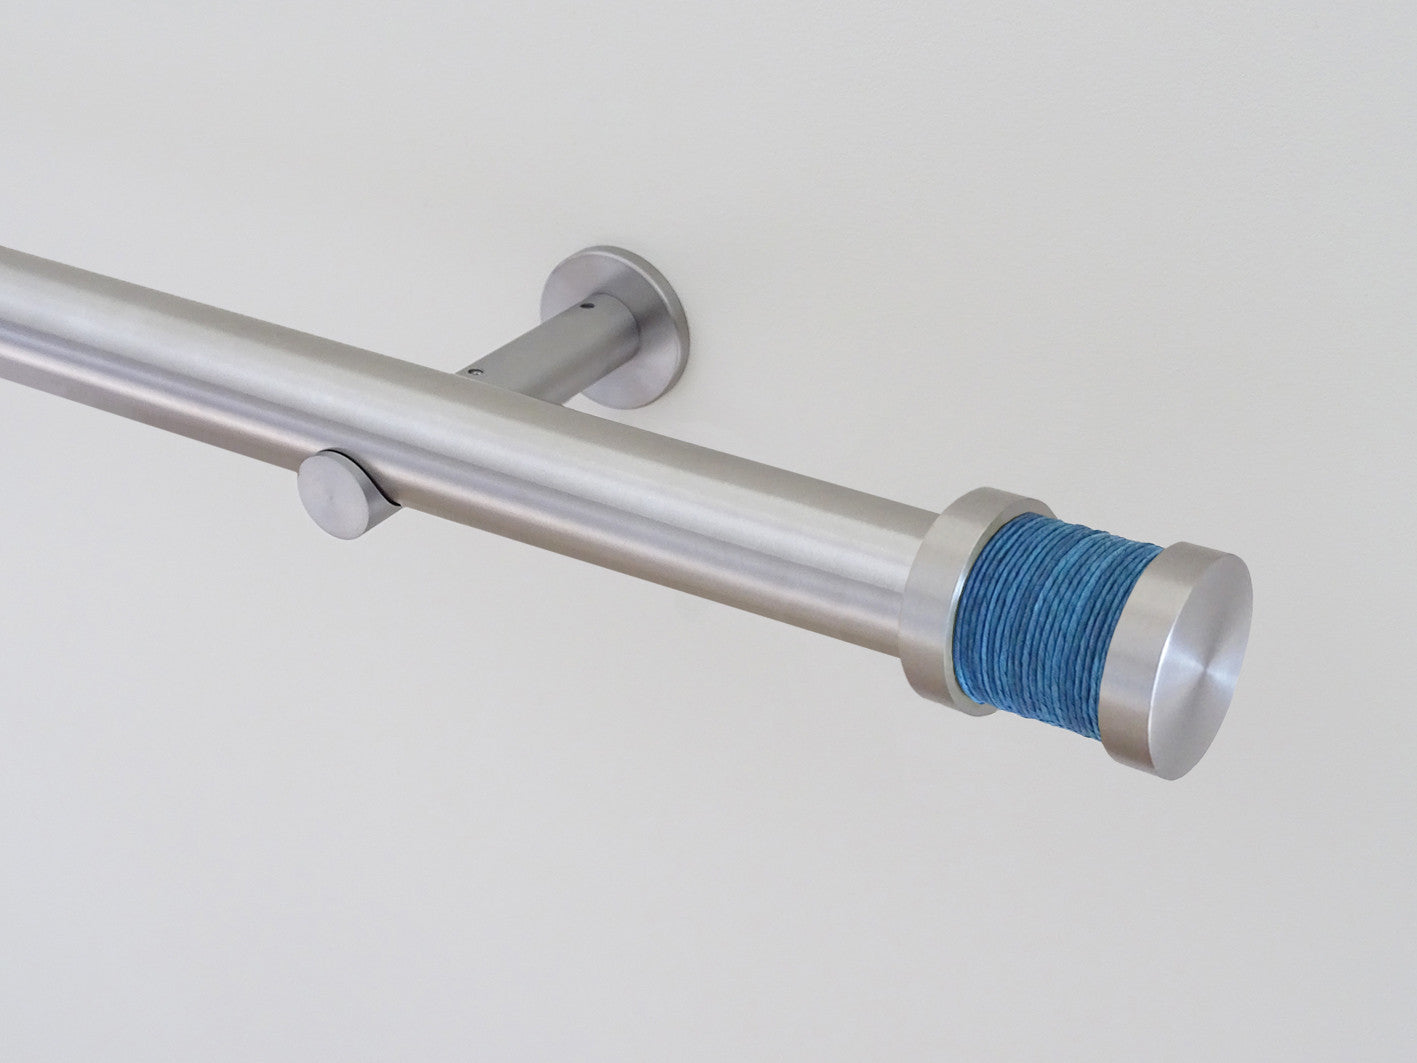 30mm diameter stainless steel curtain pole with lapis groove finials